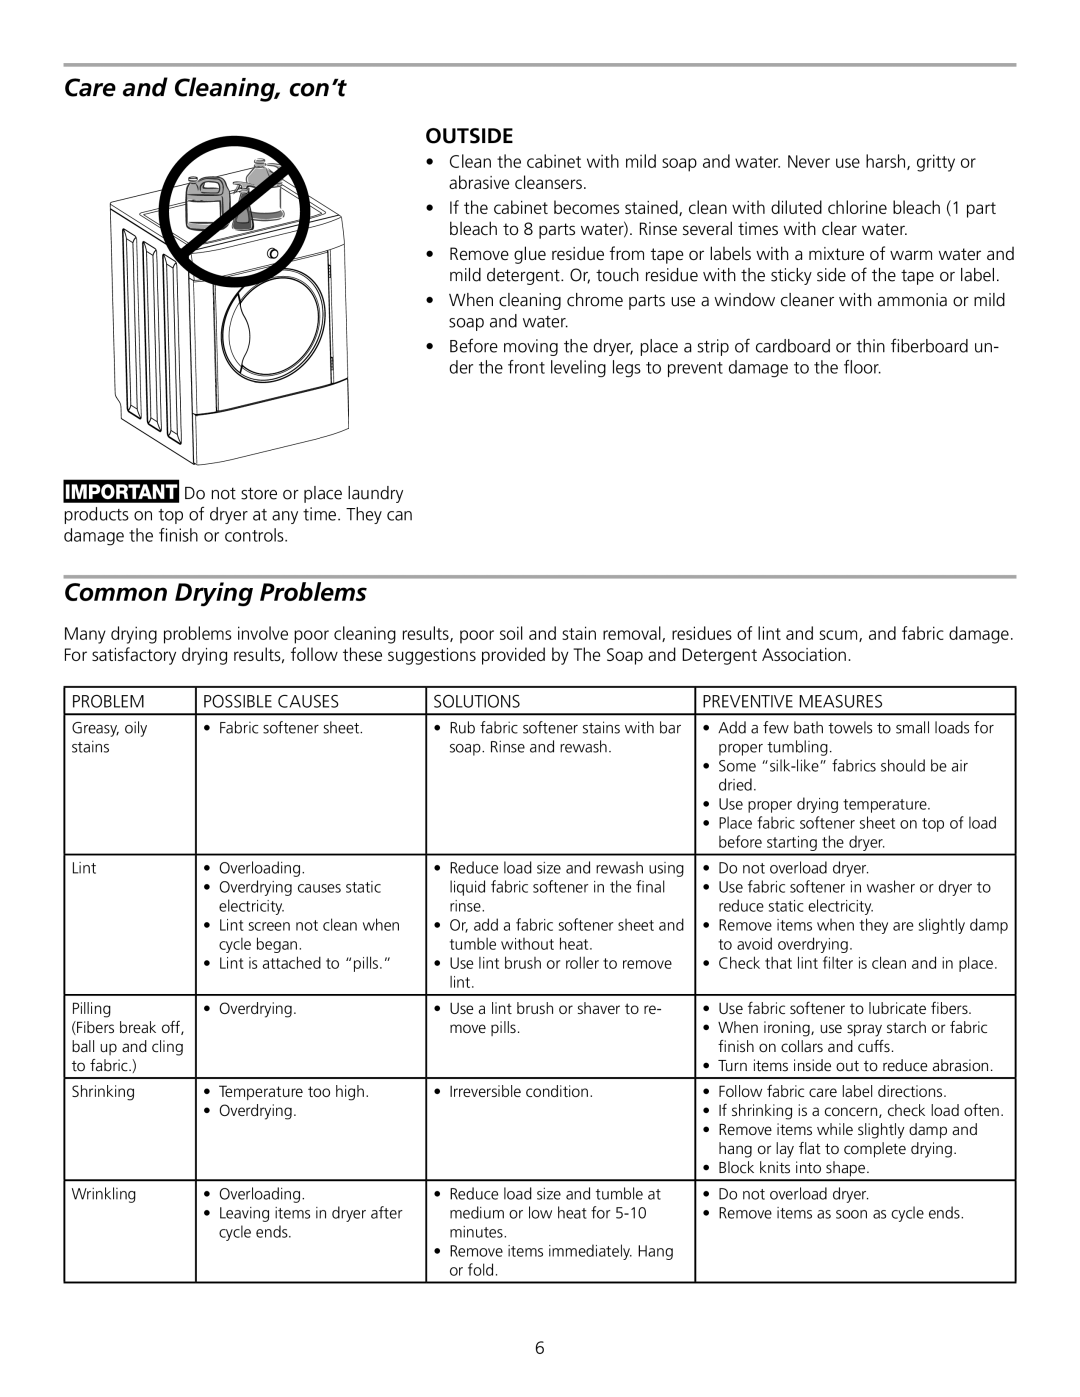 Frigidaire 137135200A manual Care and Cleaning, con’t, Common Drying Problems 